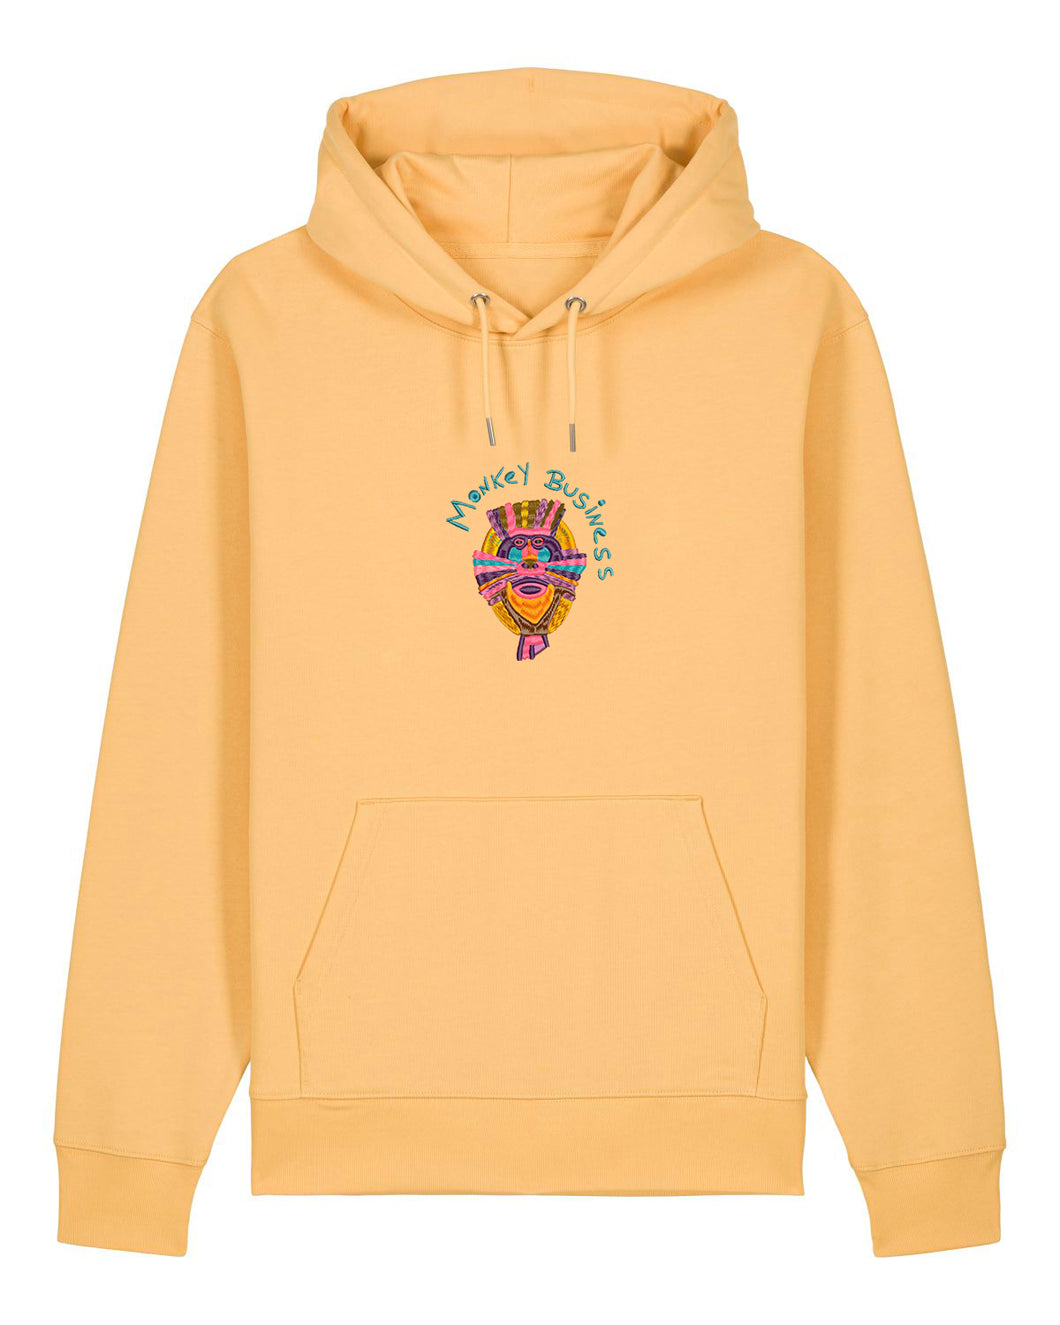 Monkey business 🐵 - Embroidered UNISEX hoodie